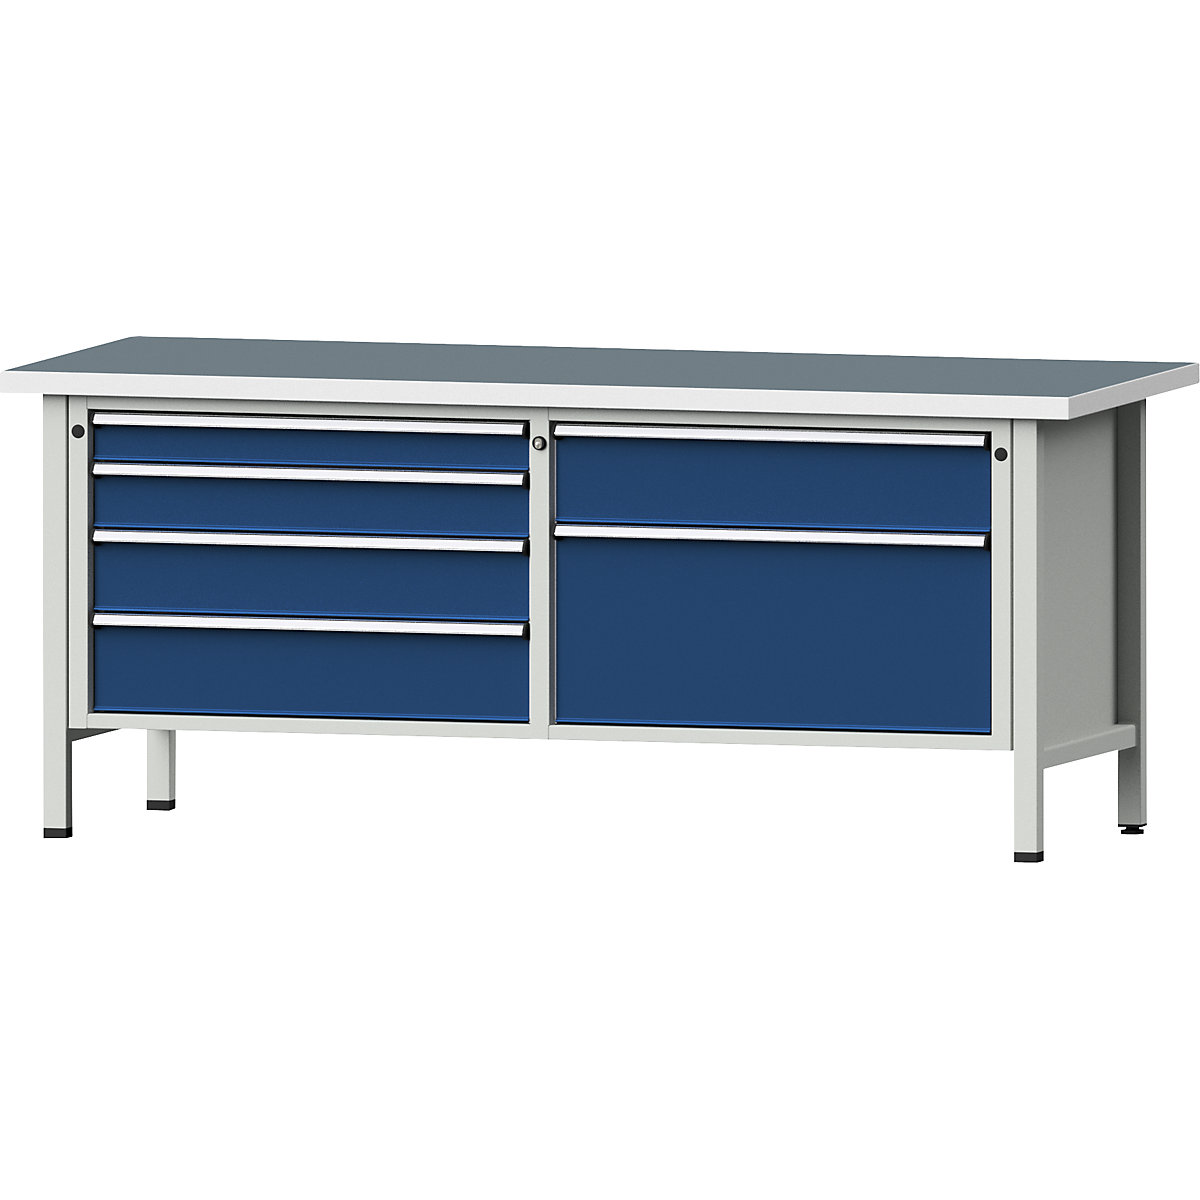 Workbench with XL/XXL drawers, frame construction – ANKE, width 2000 mm, 6 drawers, universal worktop, front in gentian blue-8